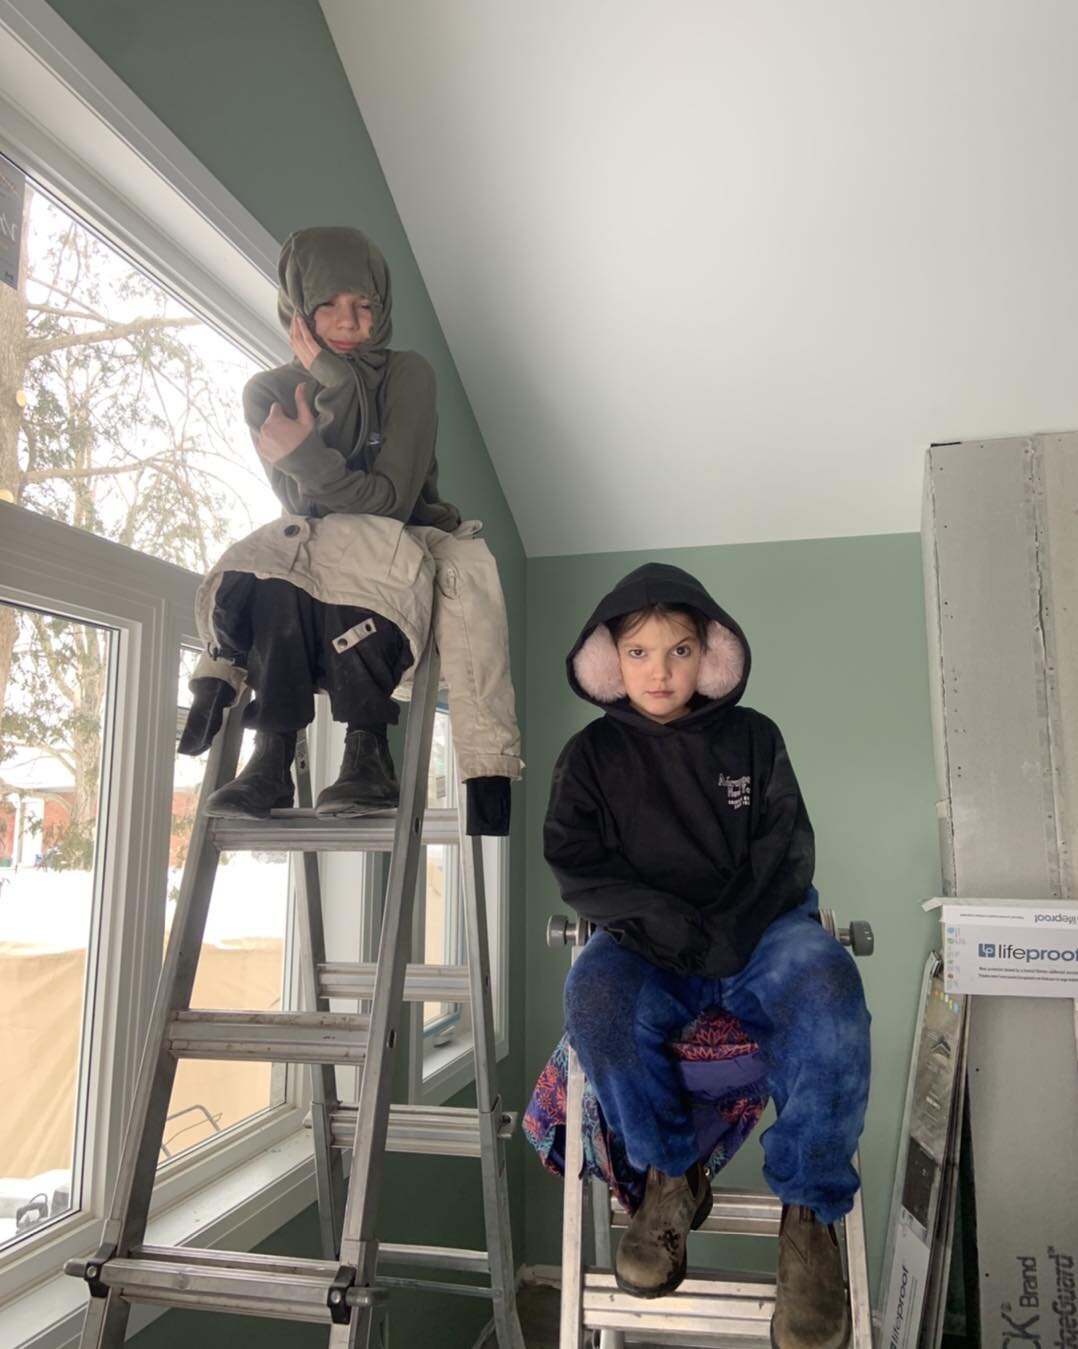 Another snow day equals another day on the jobsite.  Today they witnesses an exterior door install, vinyl floor glue install, vinyl floor install, floor covering install, clean up and prepping the jobsite.
They participated in being our personal pean